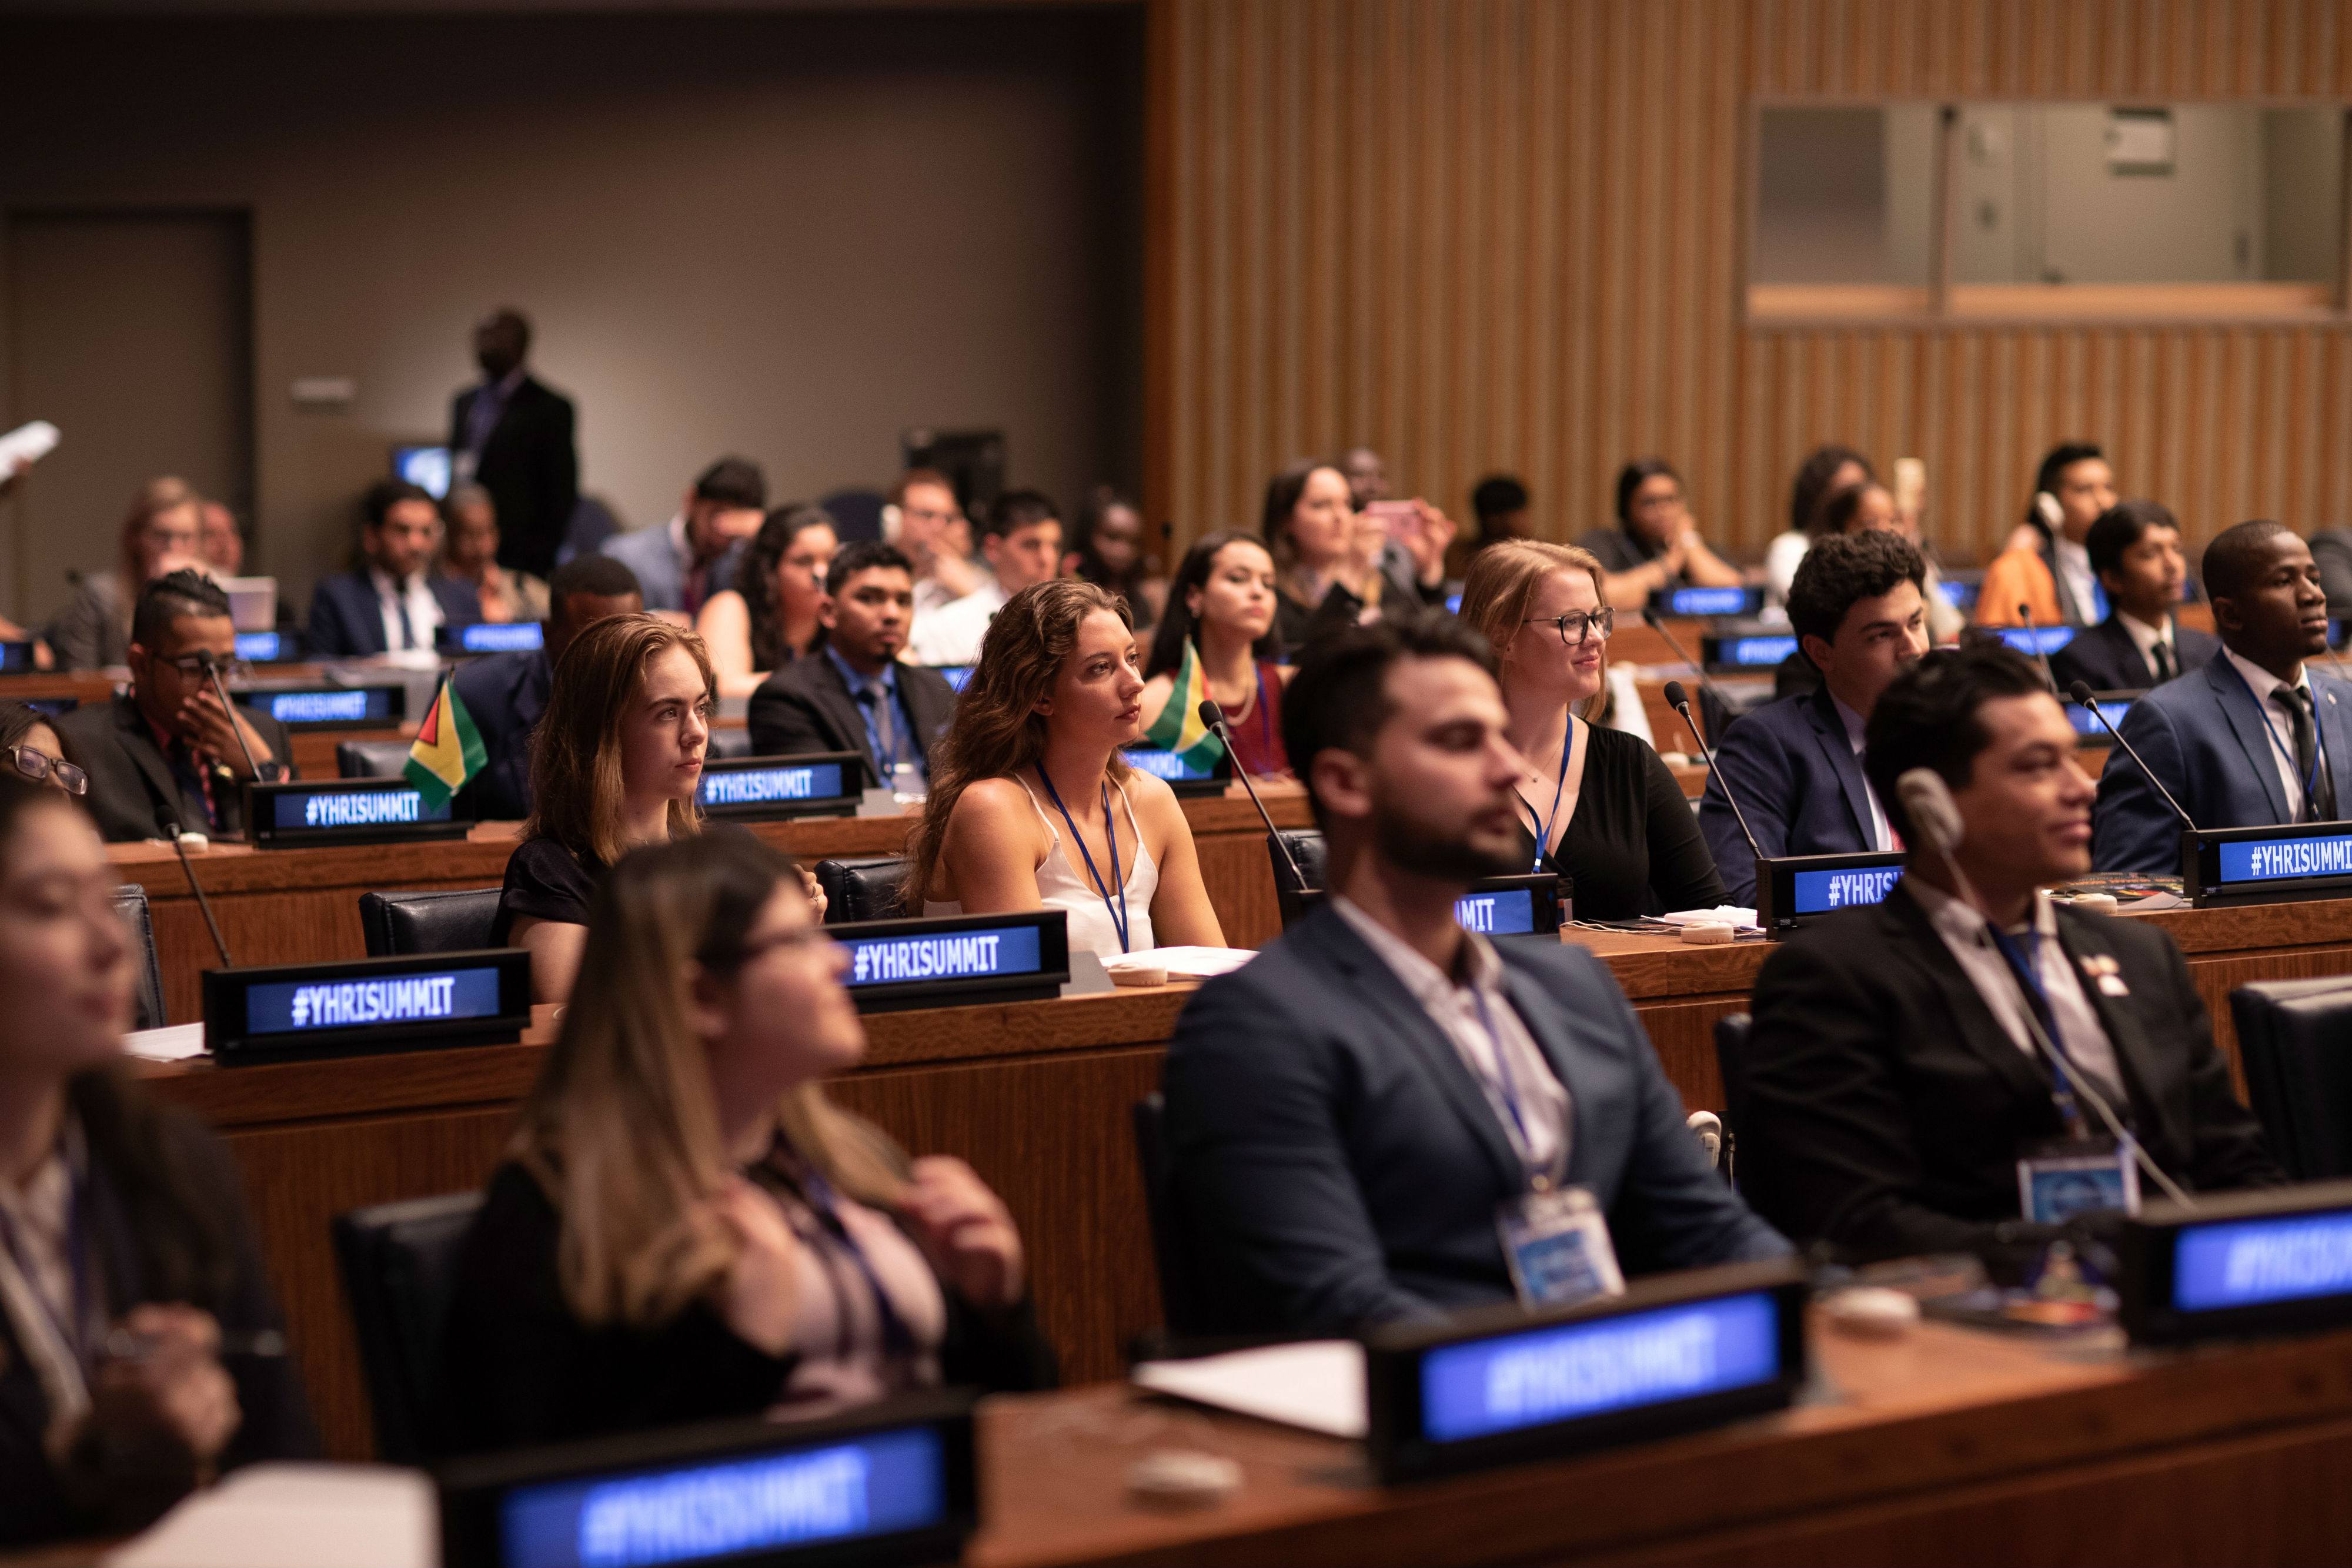 Human Rights Summit Empowers Youth to Change the World Newswire